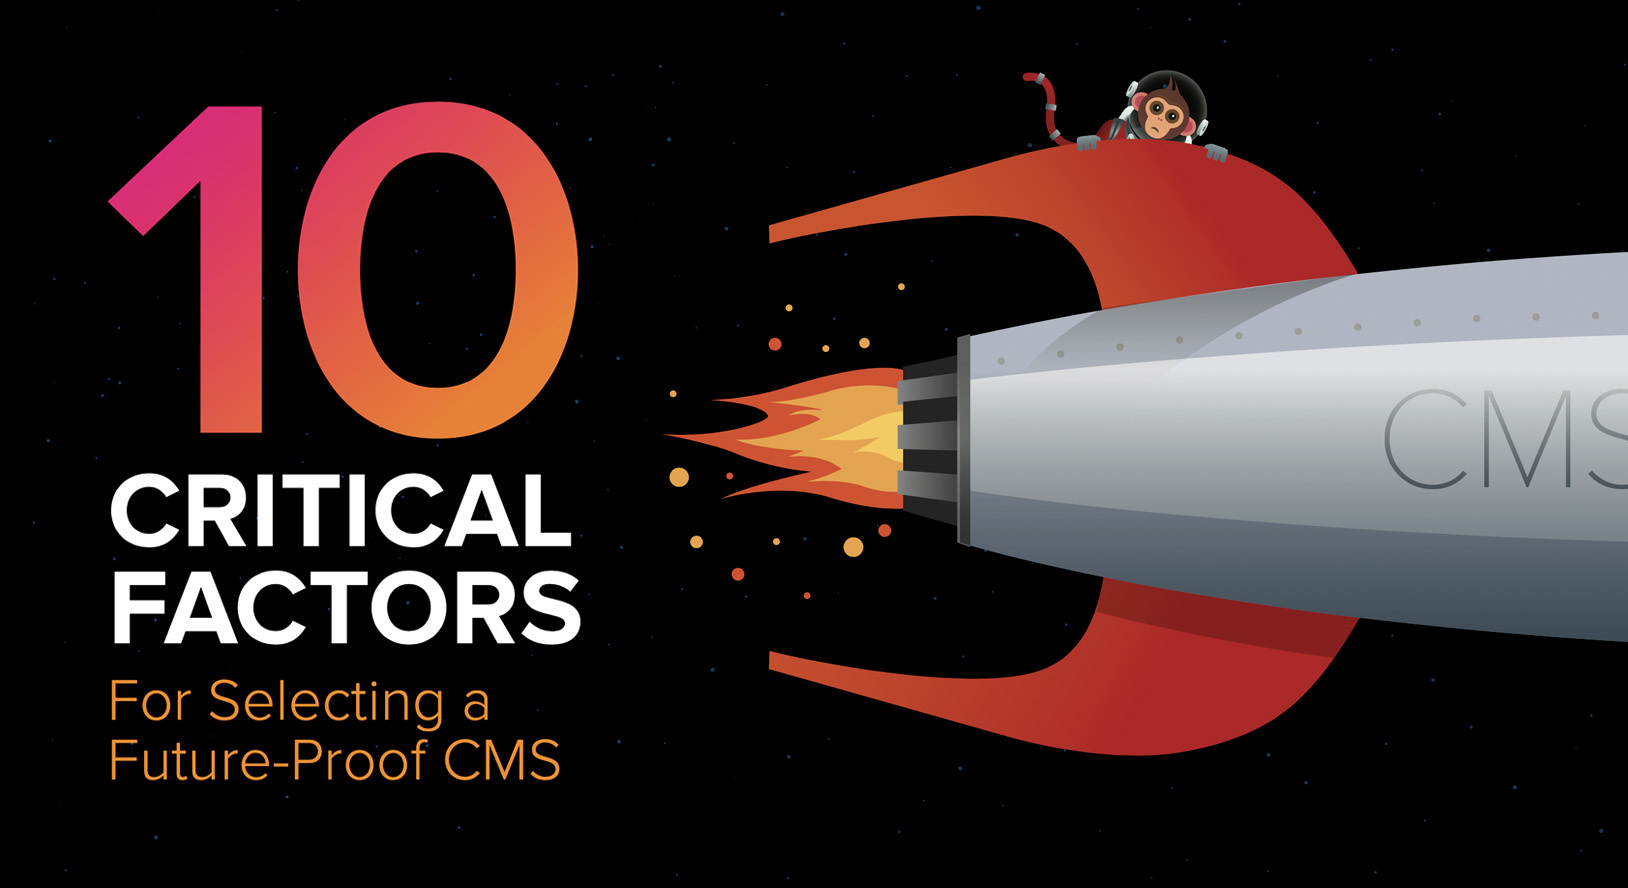 10 Critical Factors for Selecting a Future-Proof CMS